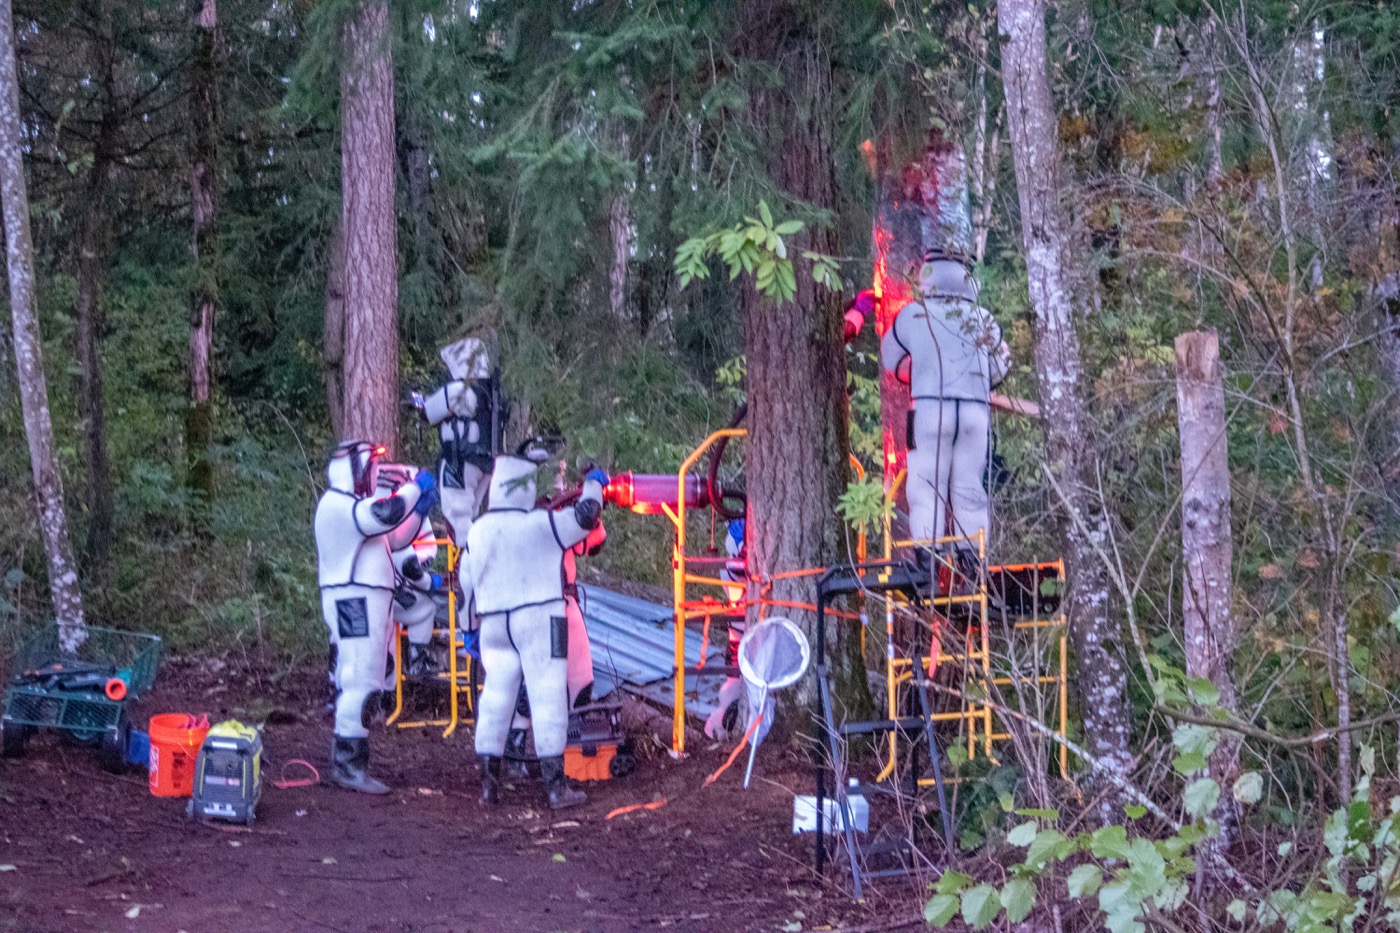 a group of people in futuristic protective gear in a forest surrounding a tree with equipment